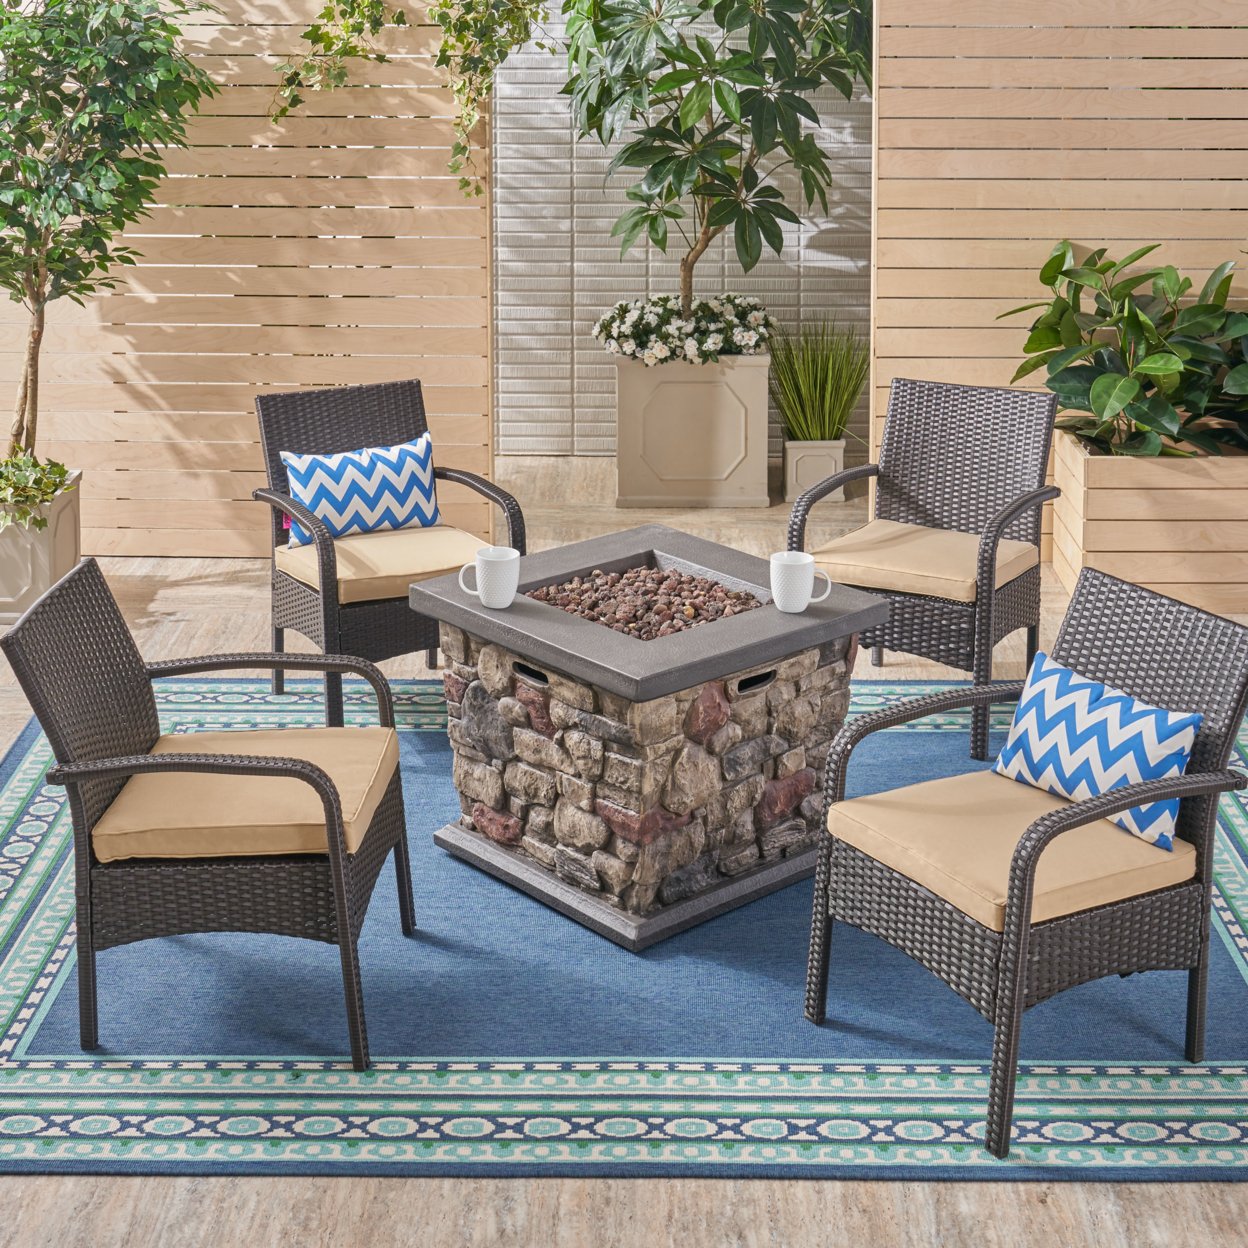 Mavis Patio Fire Pit Set, 4-Seater With Club Chairs, Wicker With Outdoor Cushions - Brown / Tan / Stone